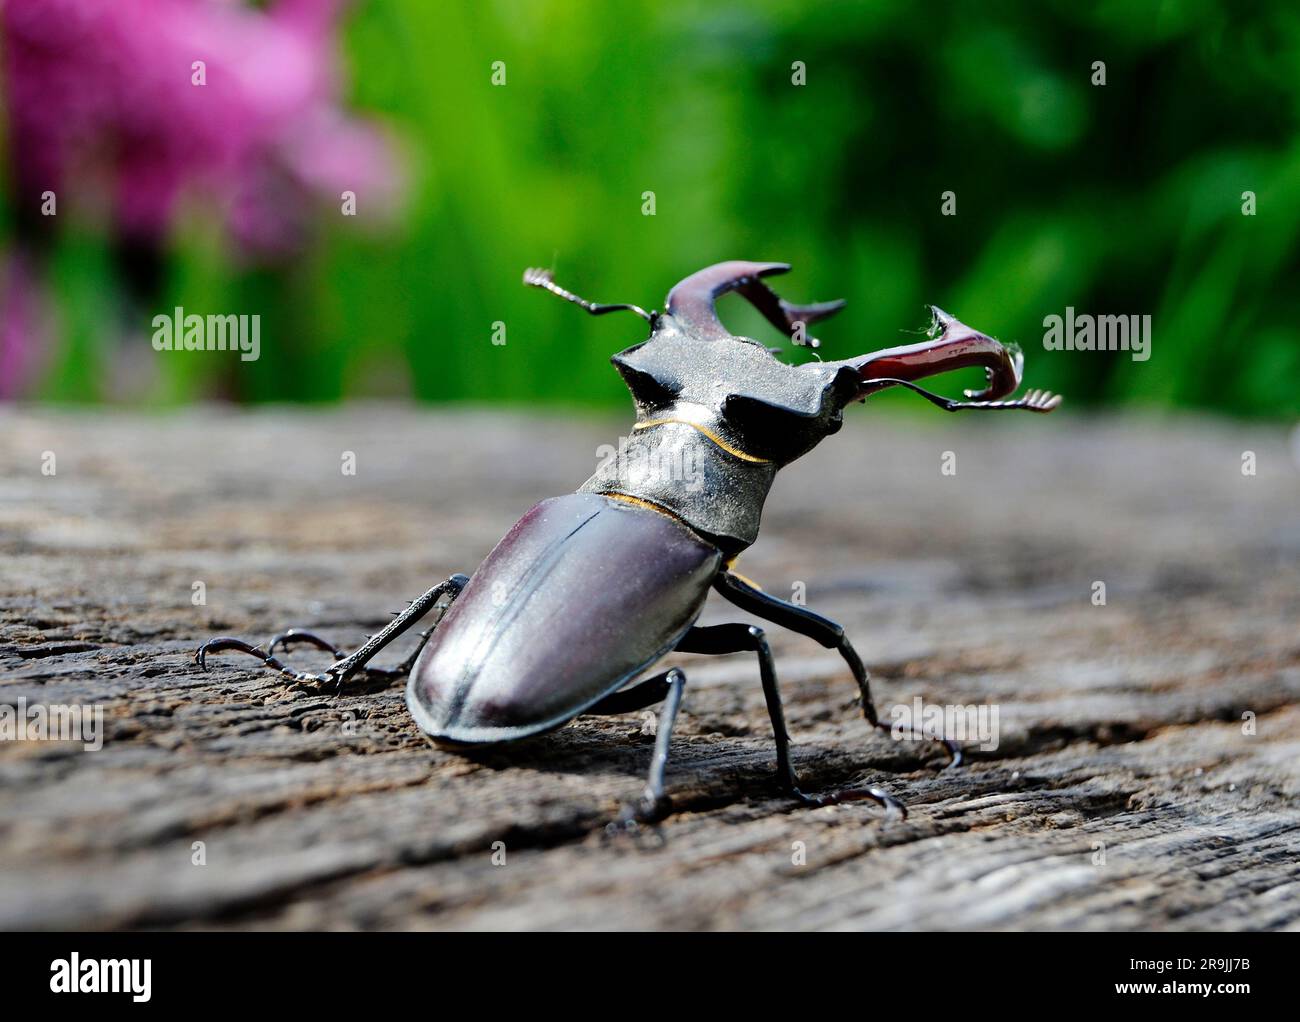 Male stag beetle with long and sharp jaws in wild forest sitting on the trunk of an oak tree, beetle stag consist of big horns, beautiful strong legs, Stock Photo